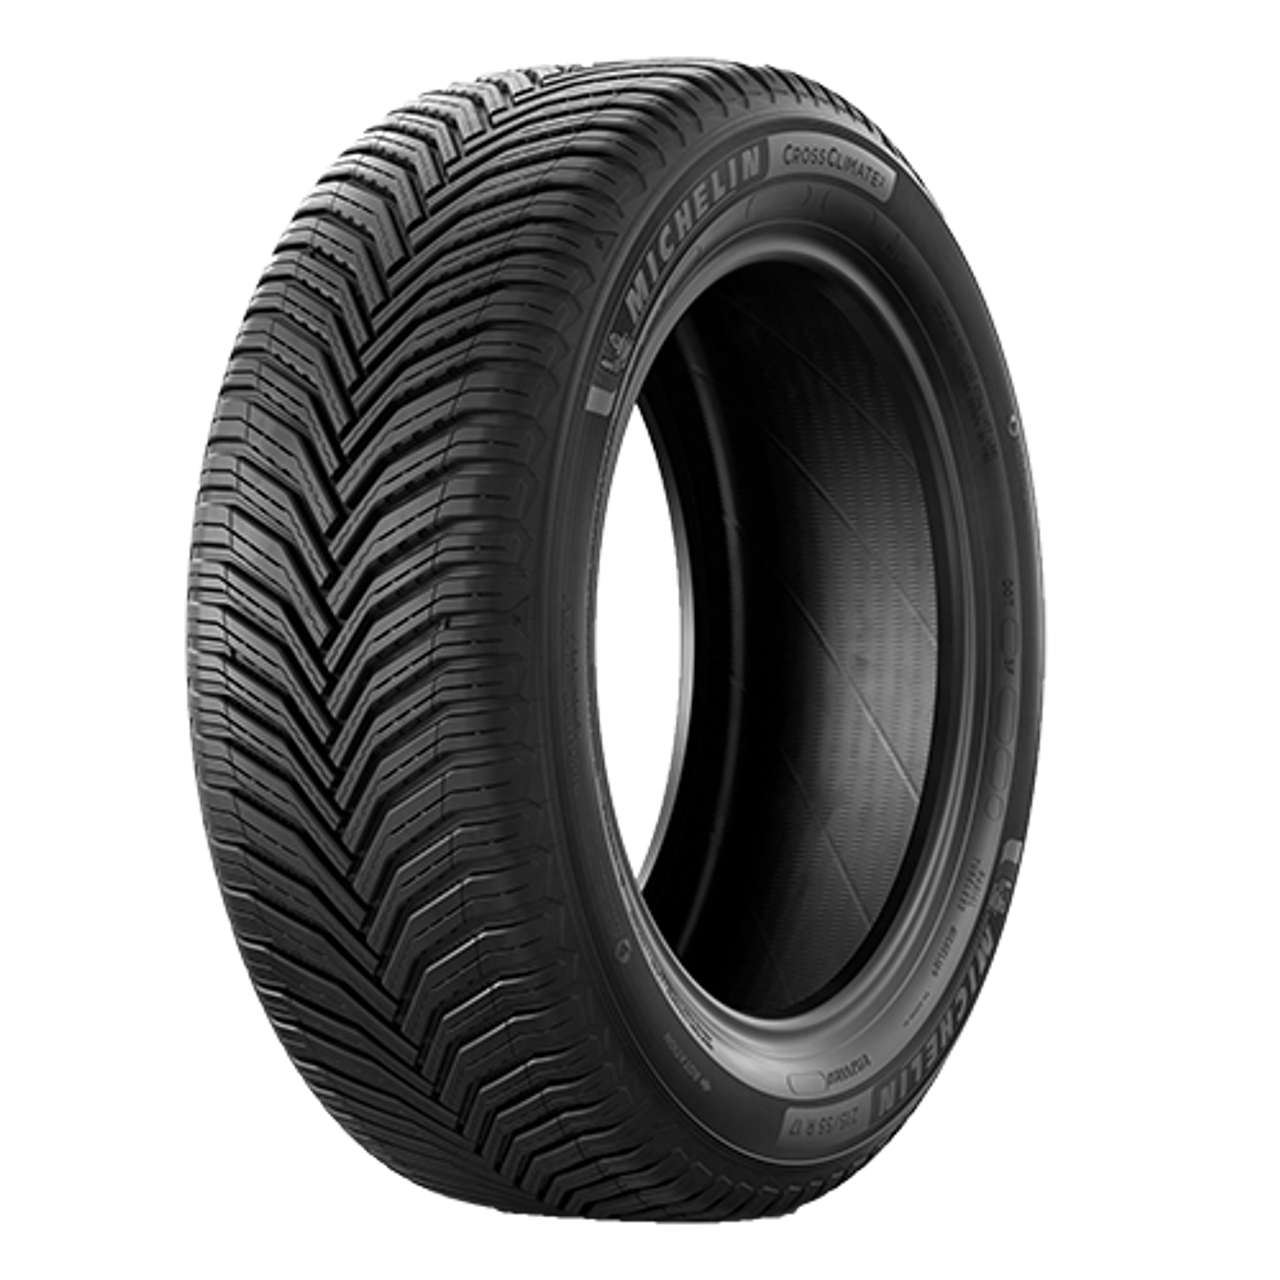 MICHELIN CROSSCLIMATE 2 SUV S1 215/55R18 95H BSW